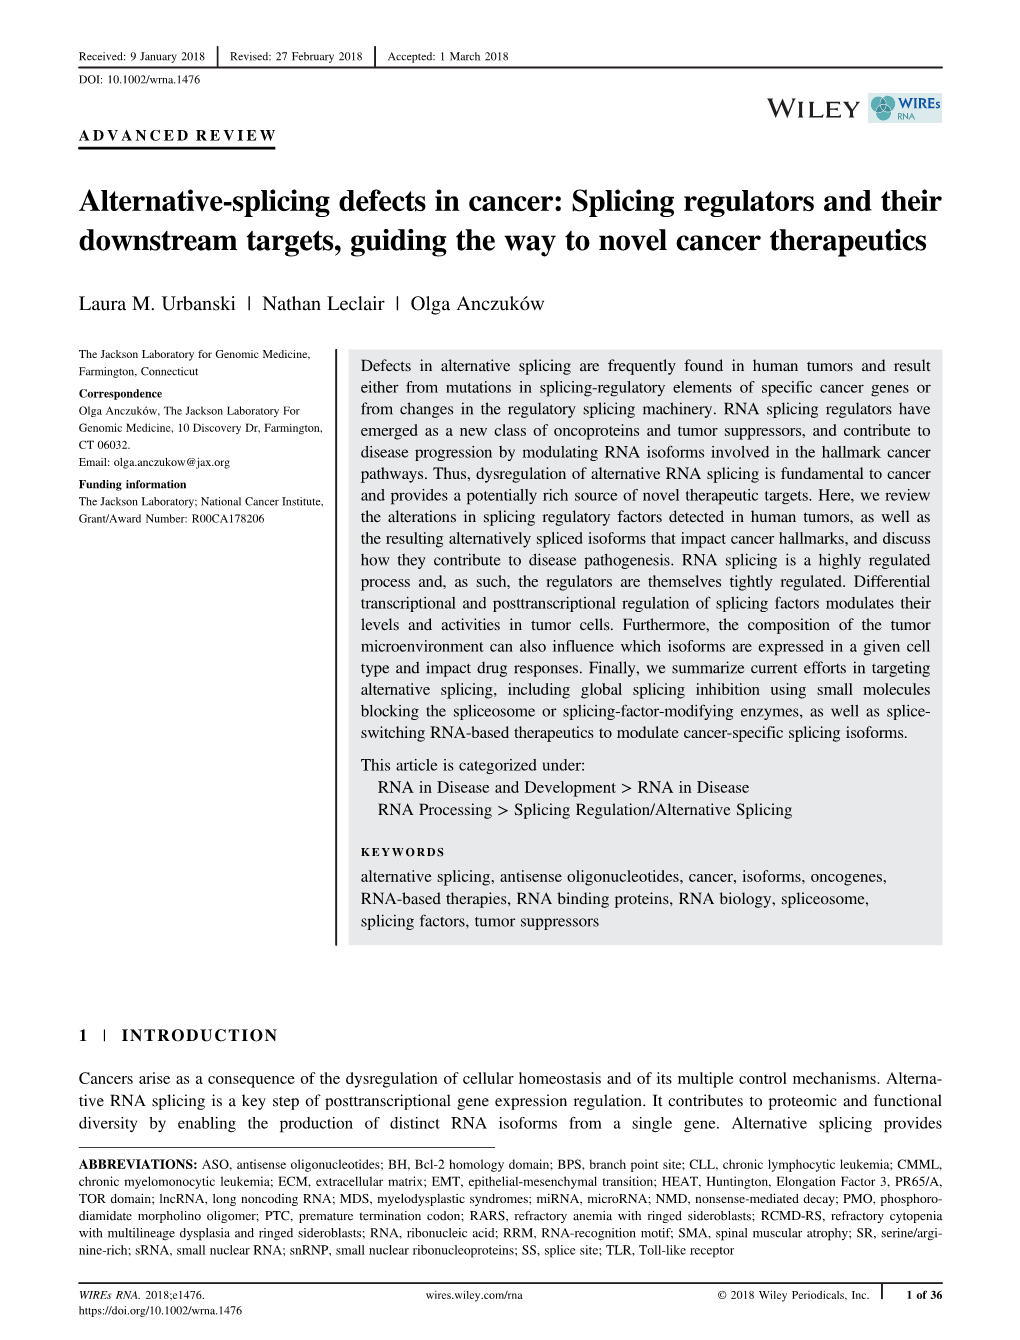 Alternative-Splicing Defects in Cancer: Splicing Regulators and Their Downstream Targets, Guiding the Way to Novel Cancer Therapeutics